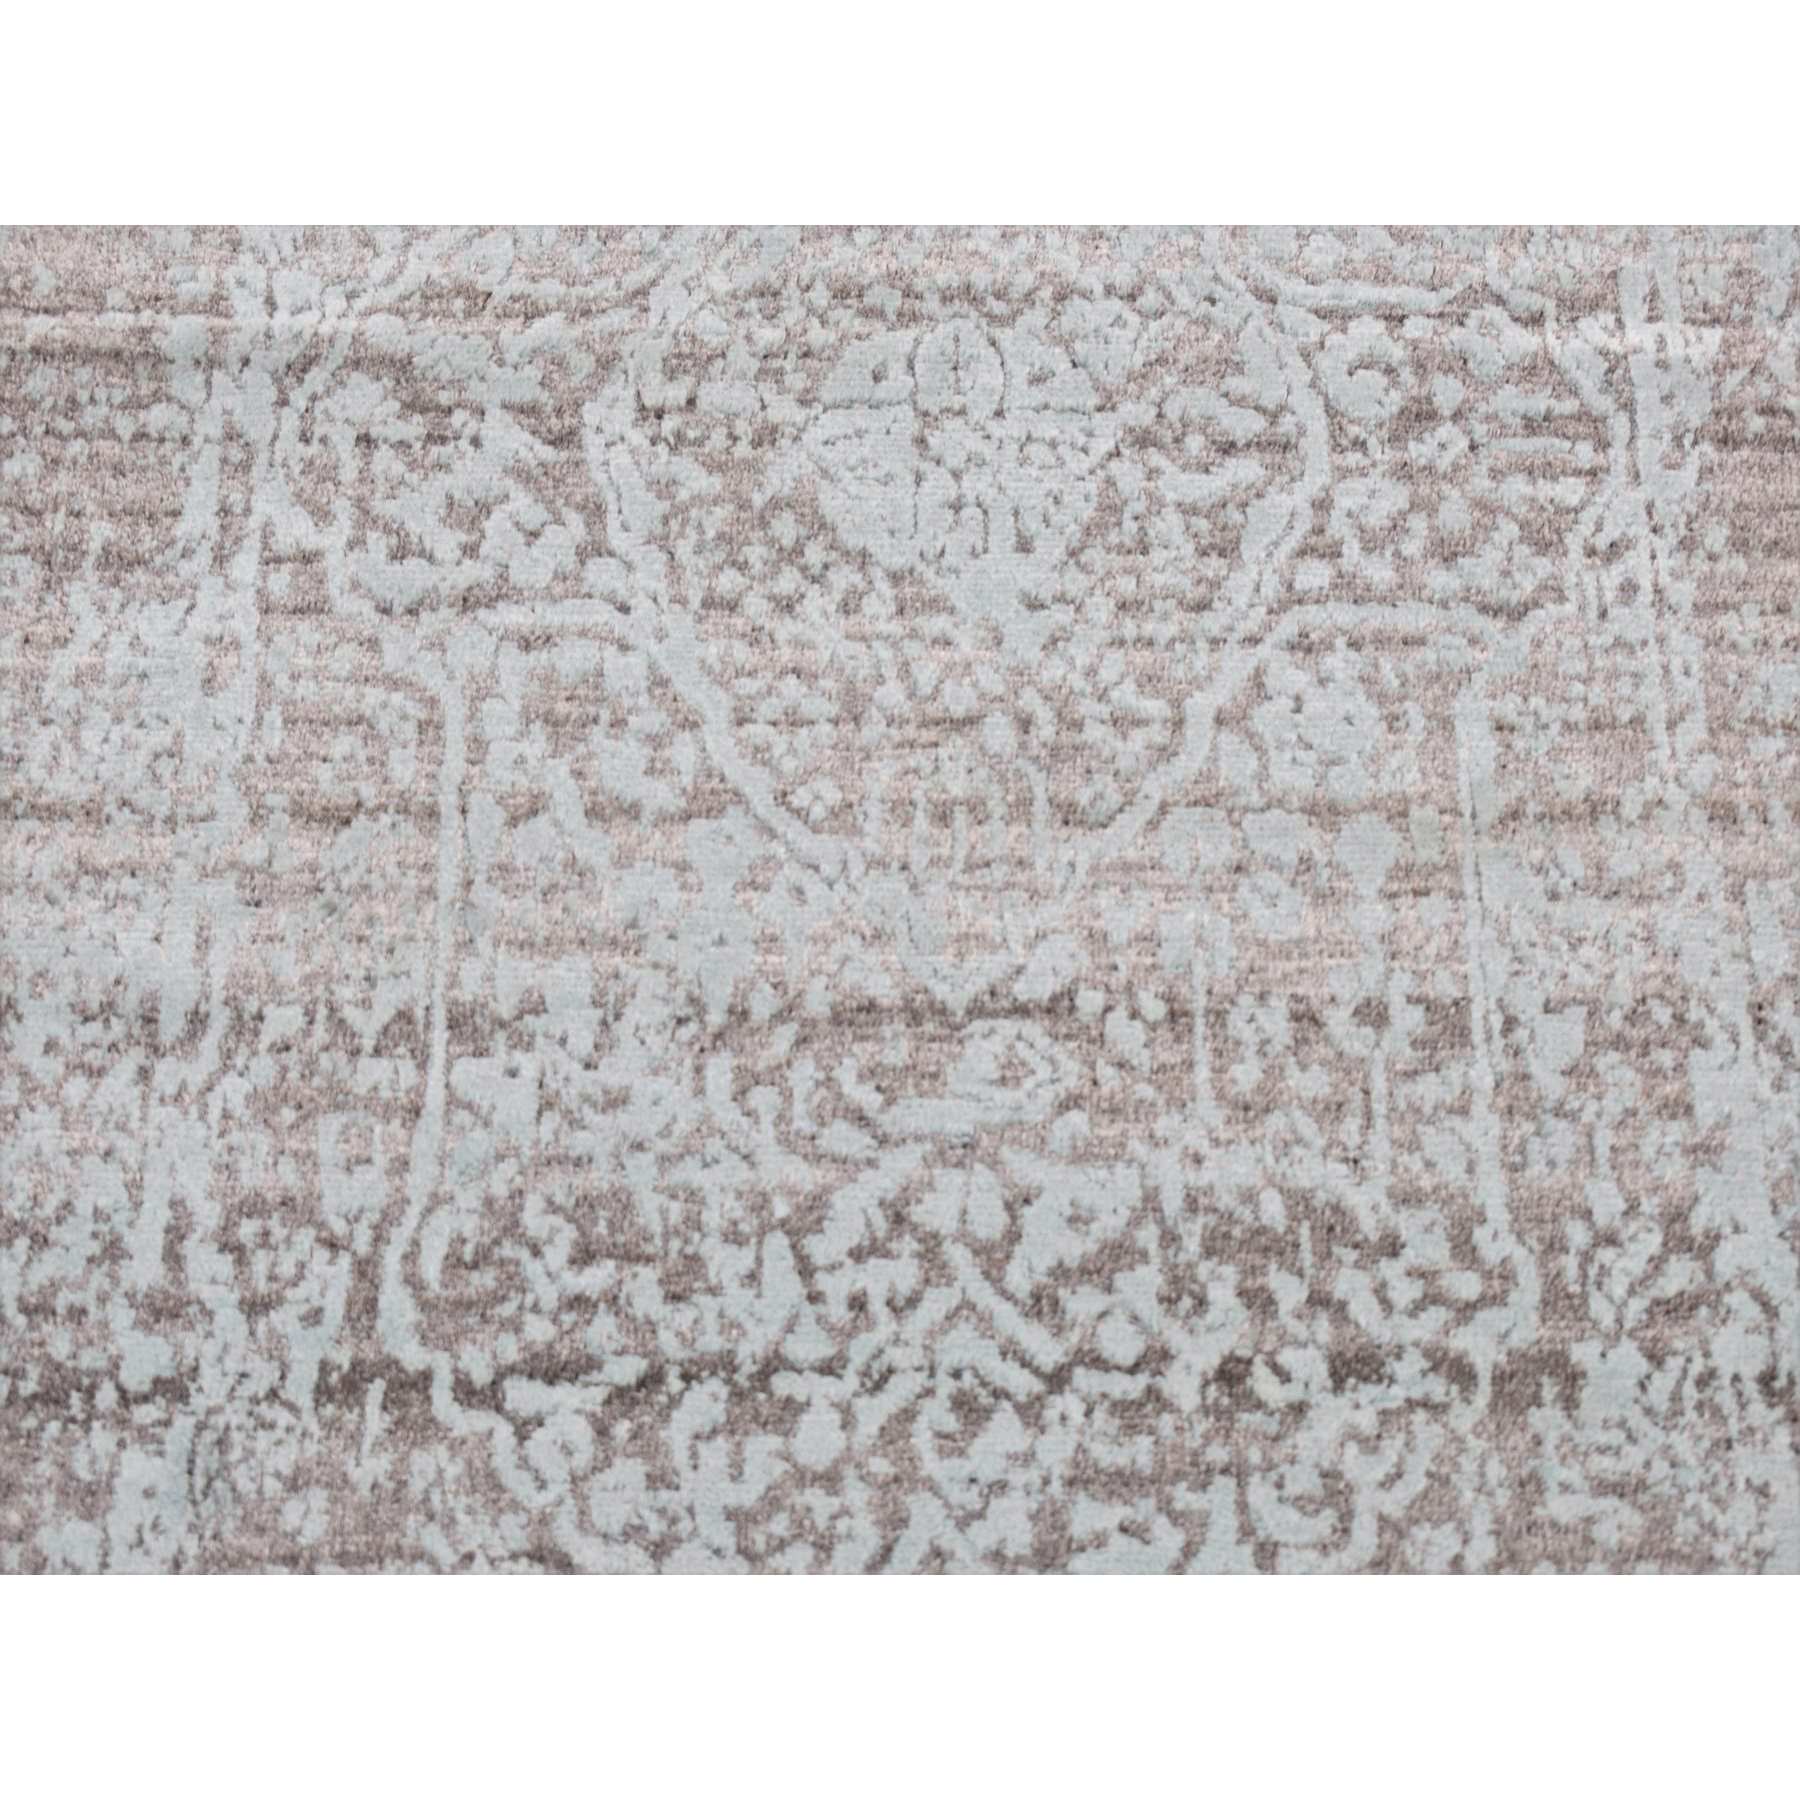 Transitional-Hand-Knotted-Rug-436265